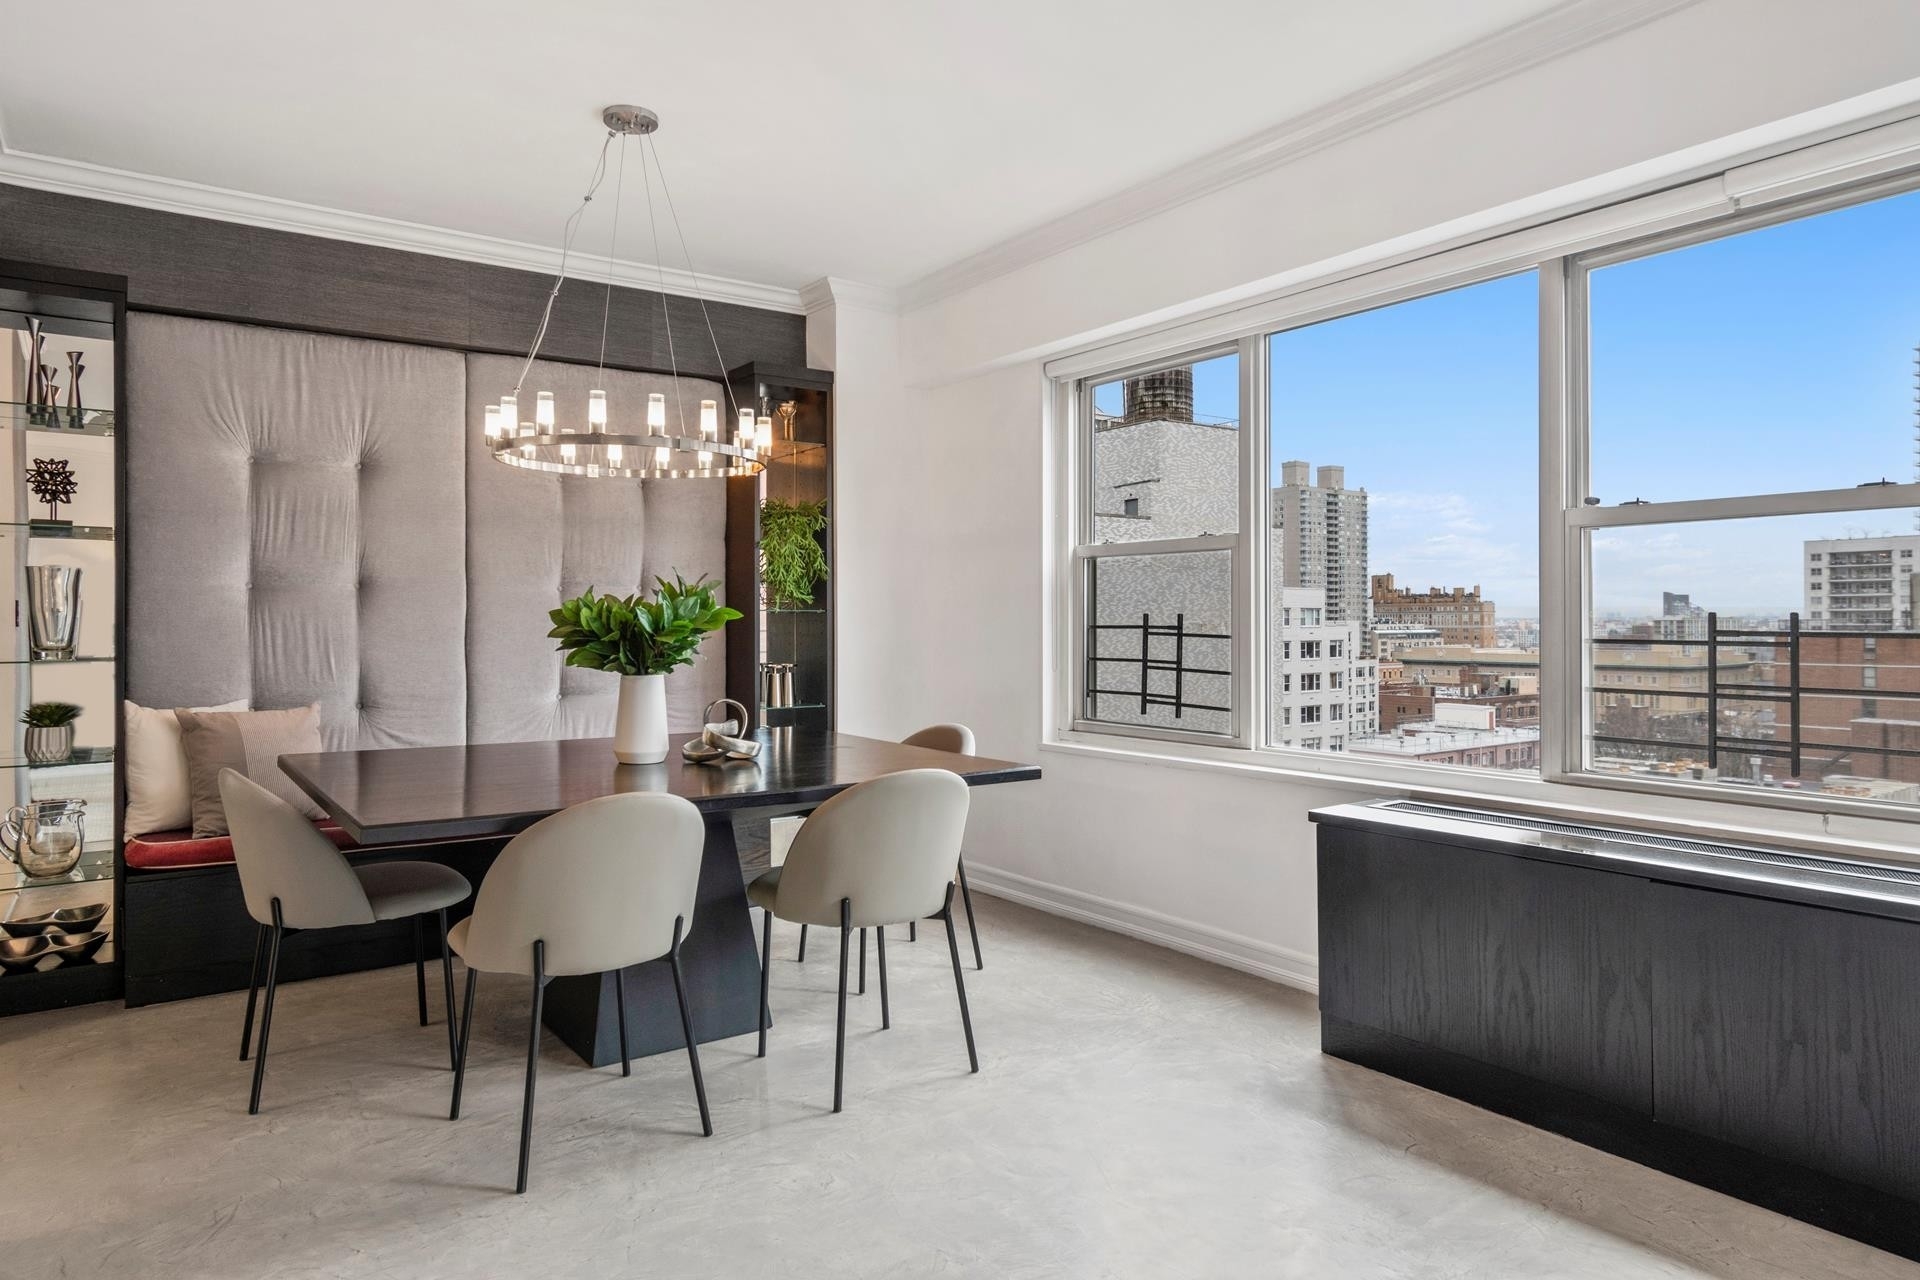 2. Co-op Properties for Sale at Newport East, 370 E 76TH ST, B1403/1404 Lenox Hill, New York, New York 10021